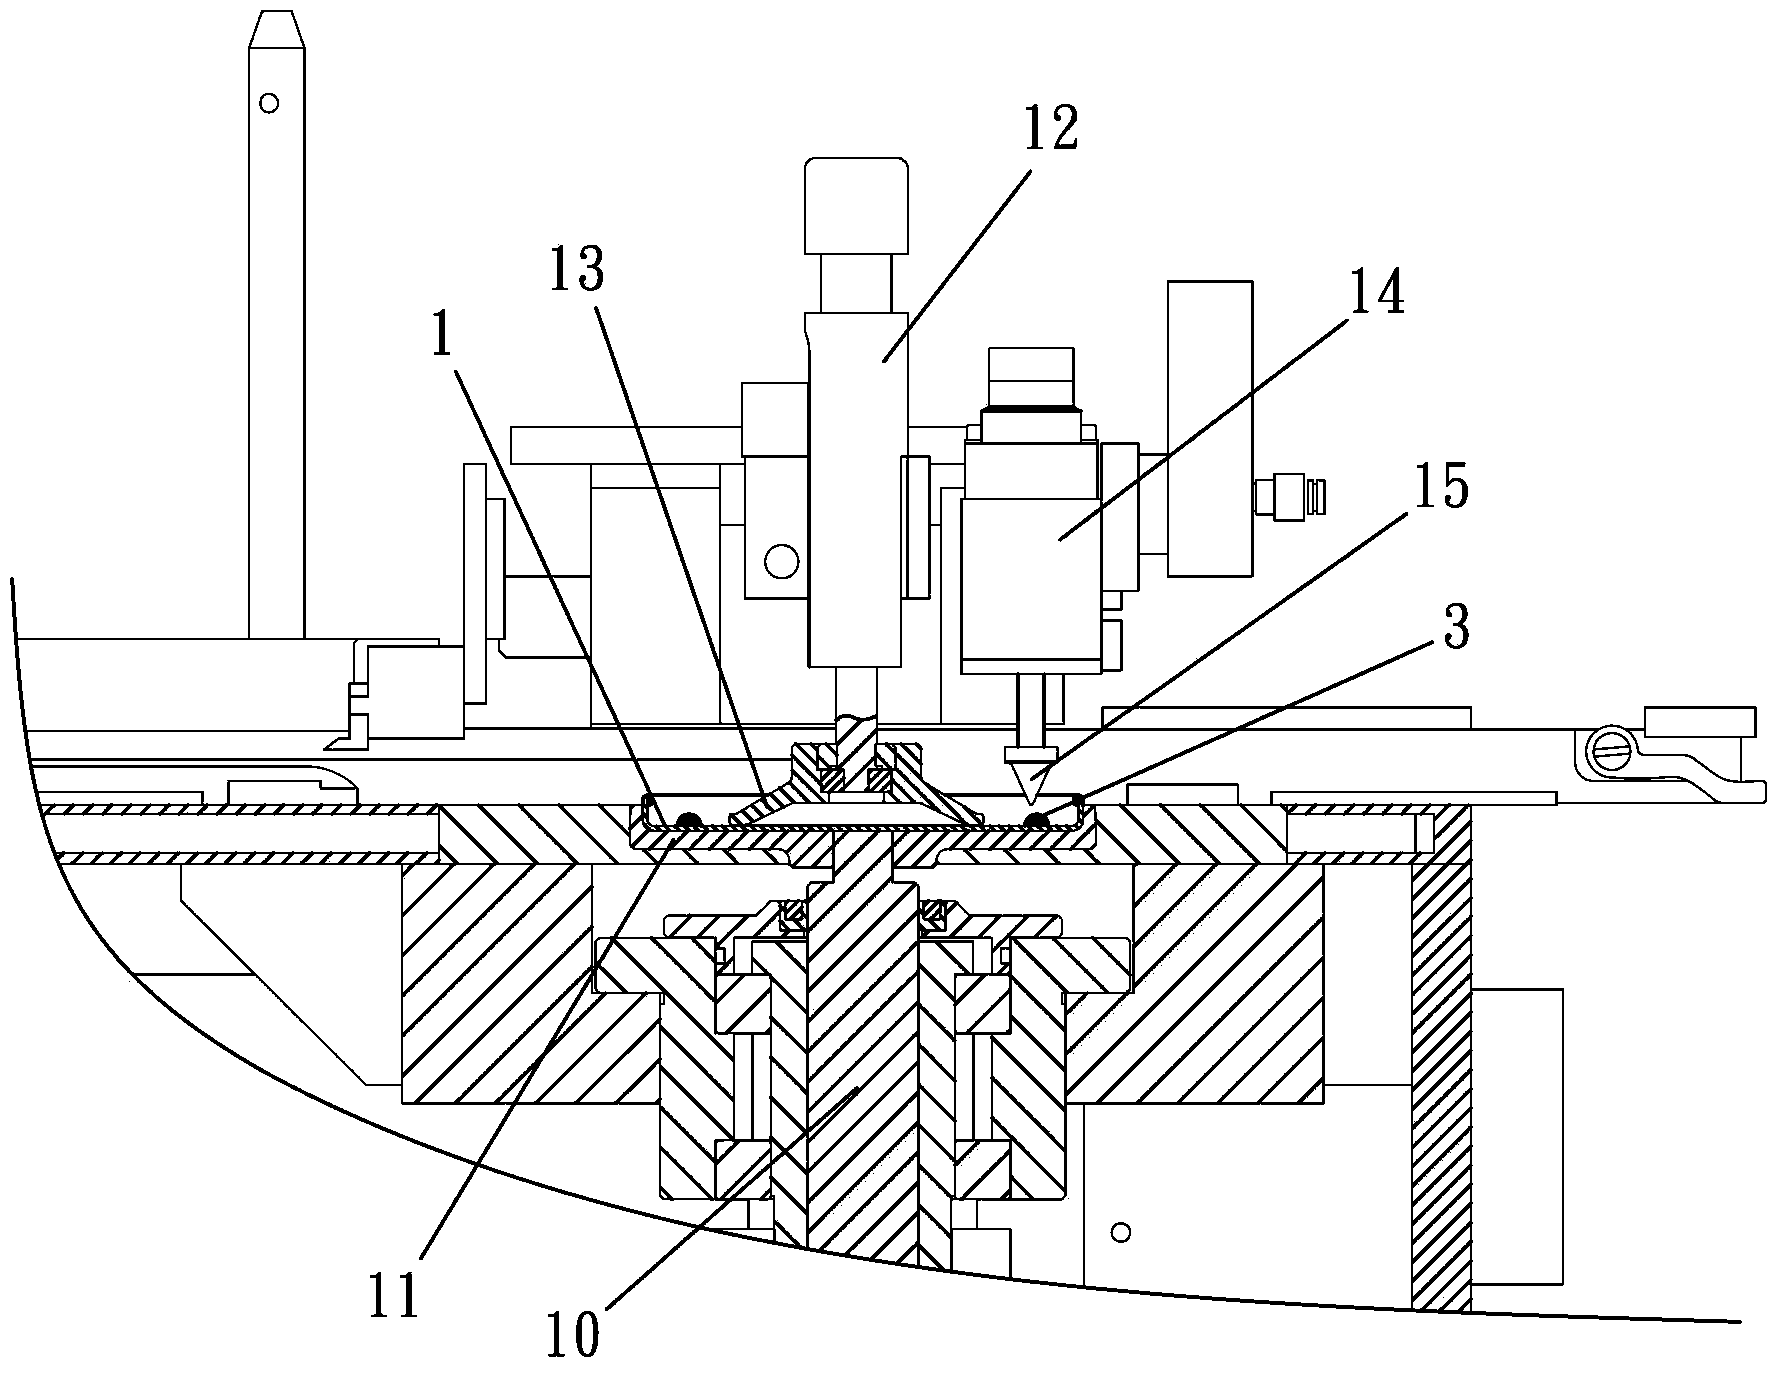 Preparation method of cover sealing glue layer